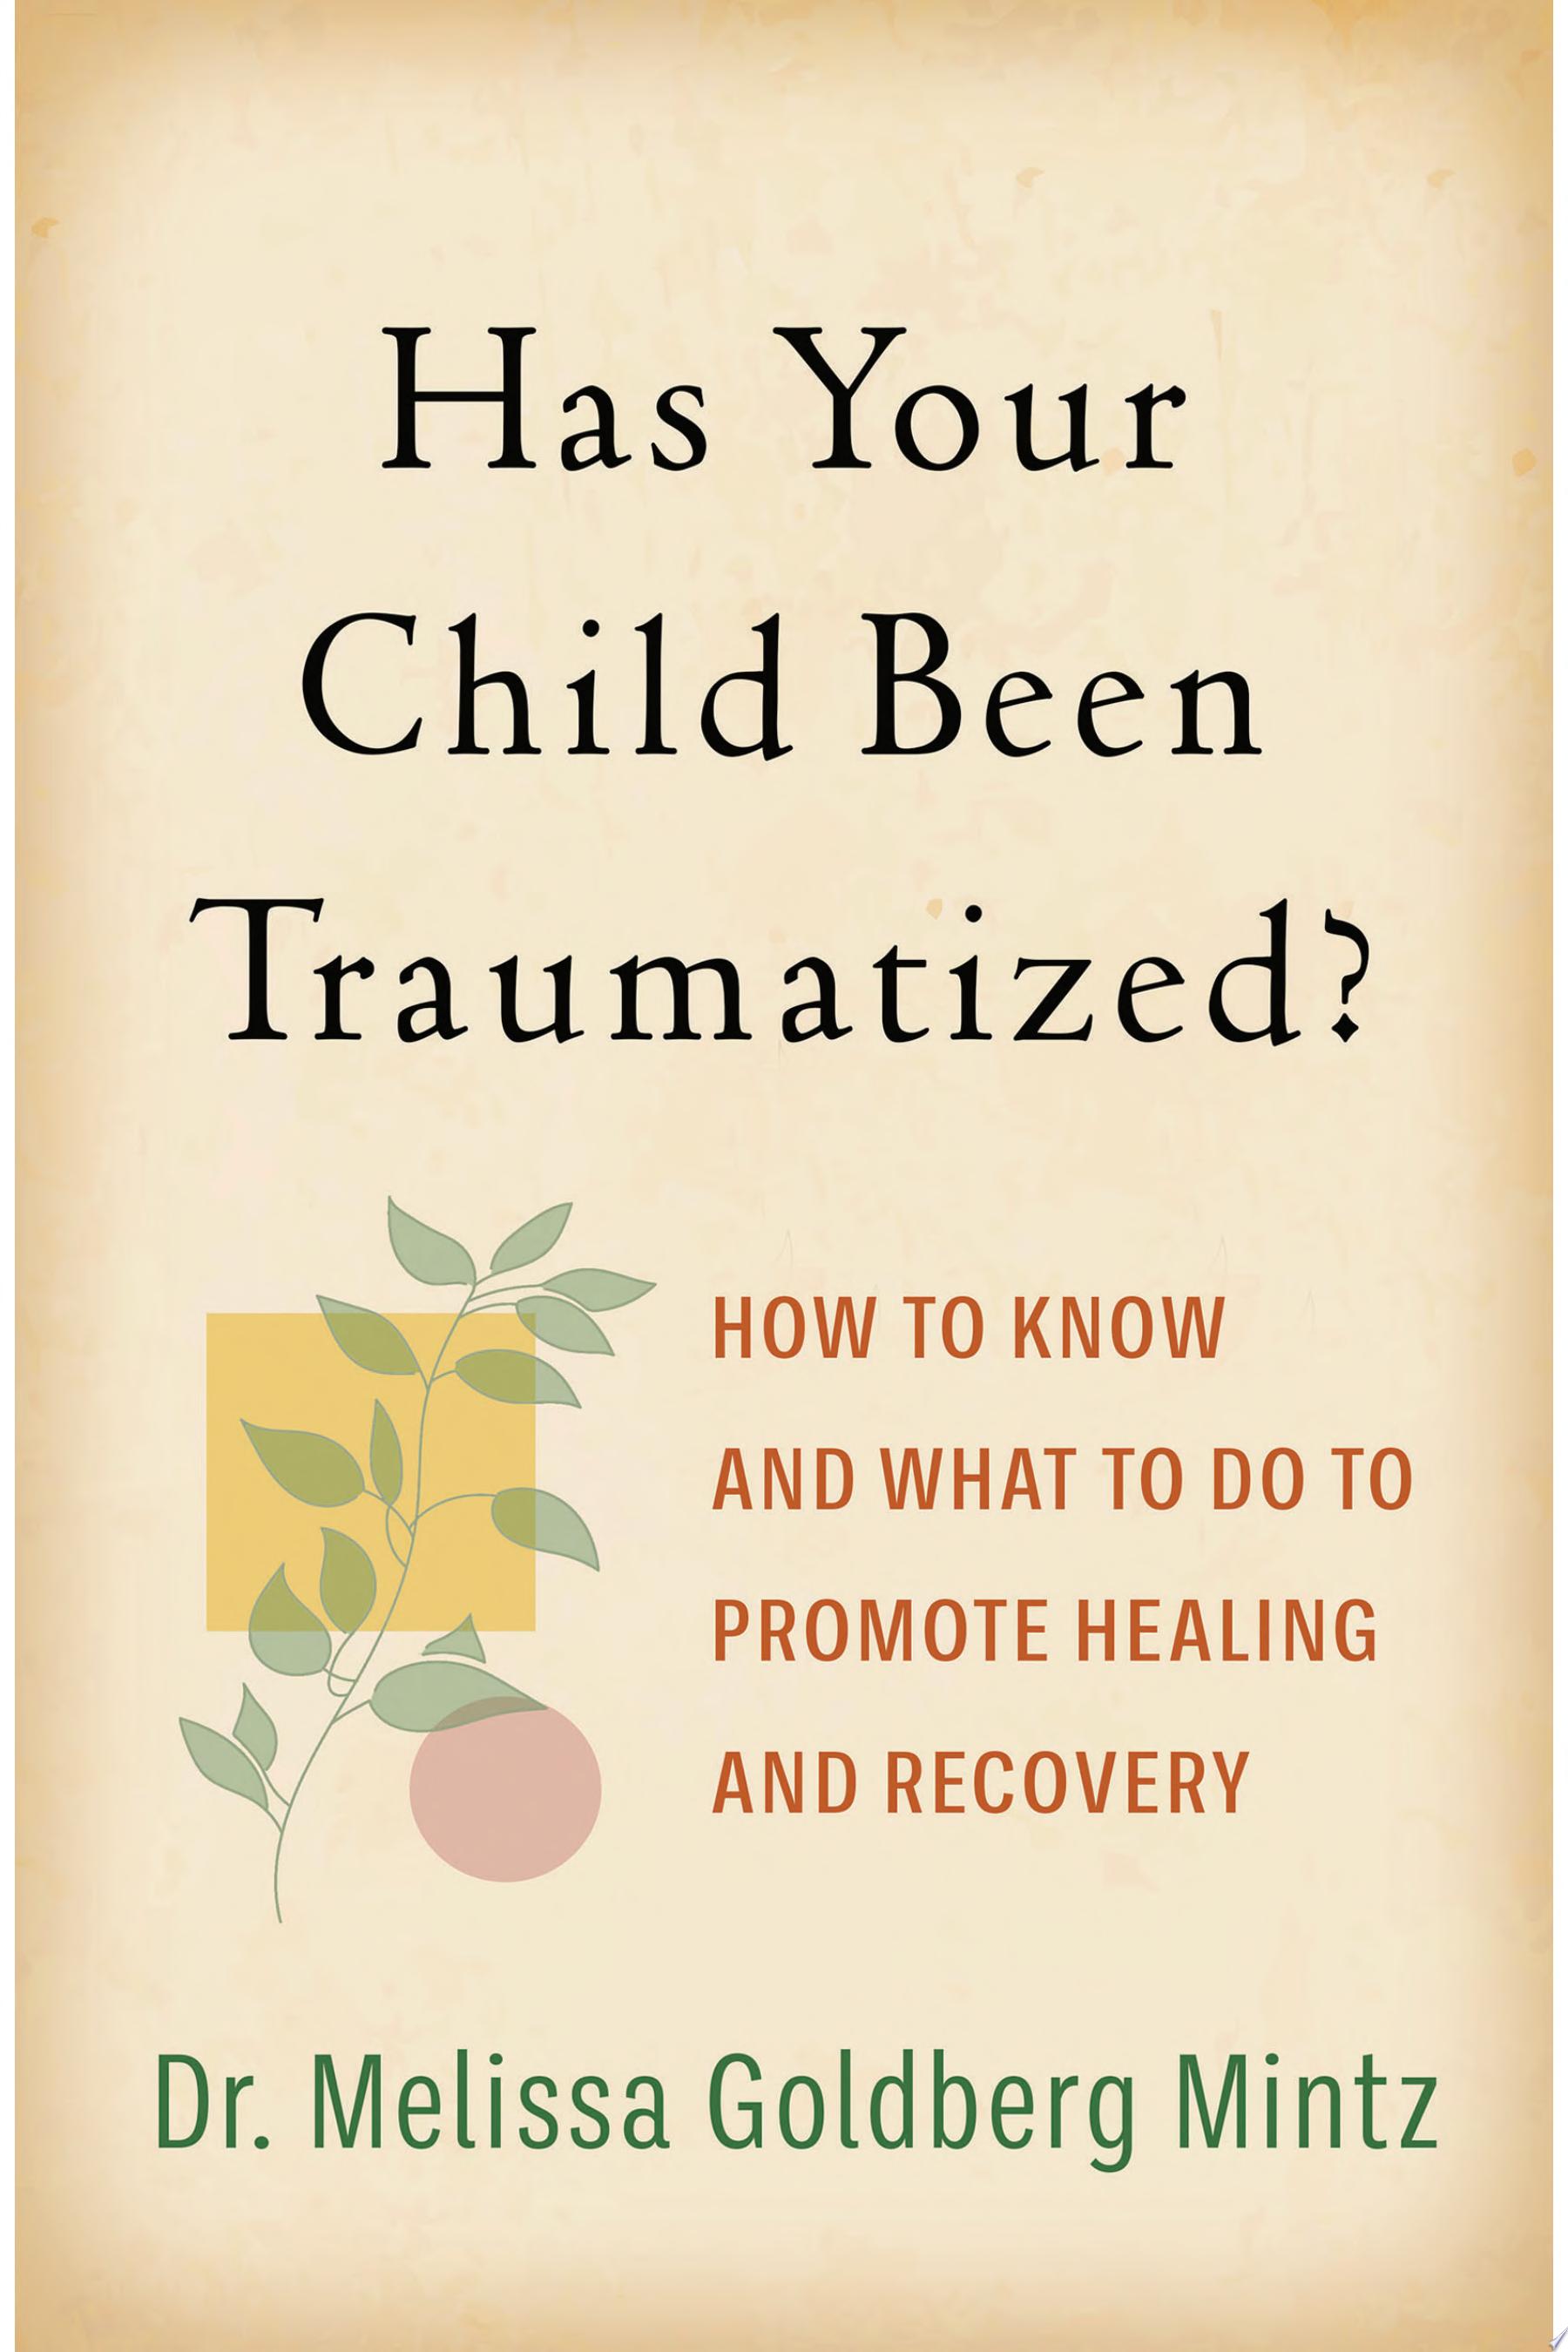 Image for "Has Your Child Been Traumatized?"